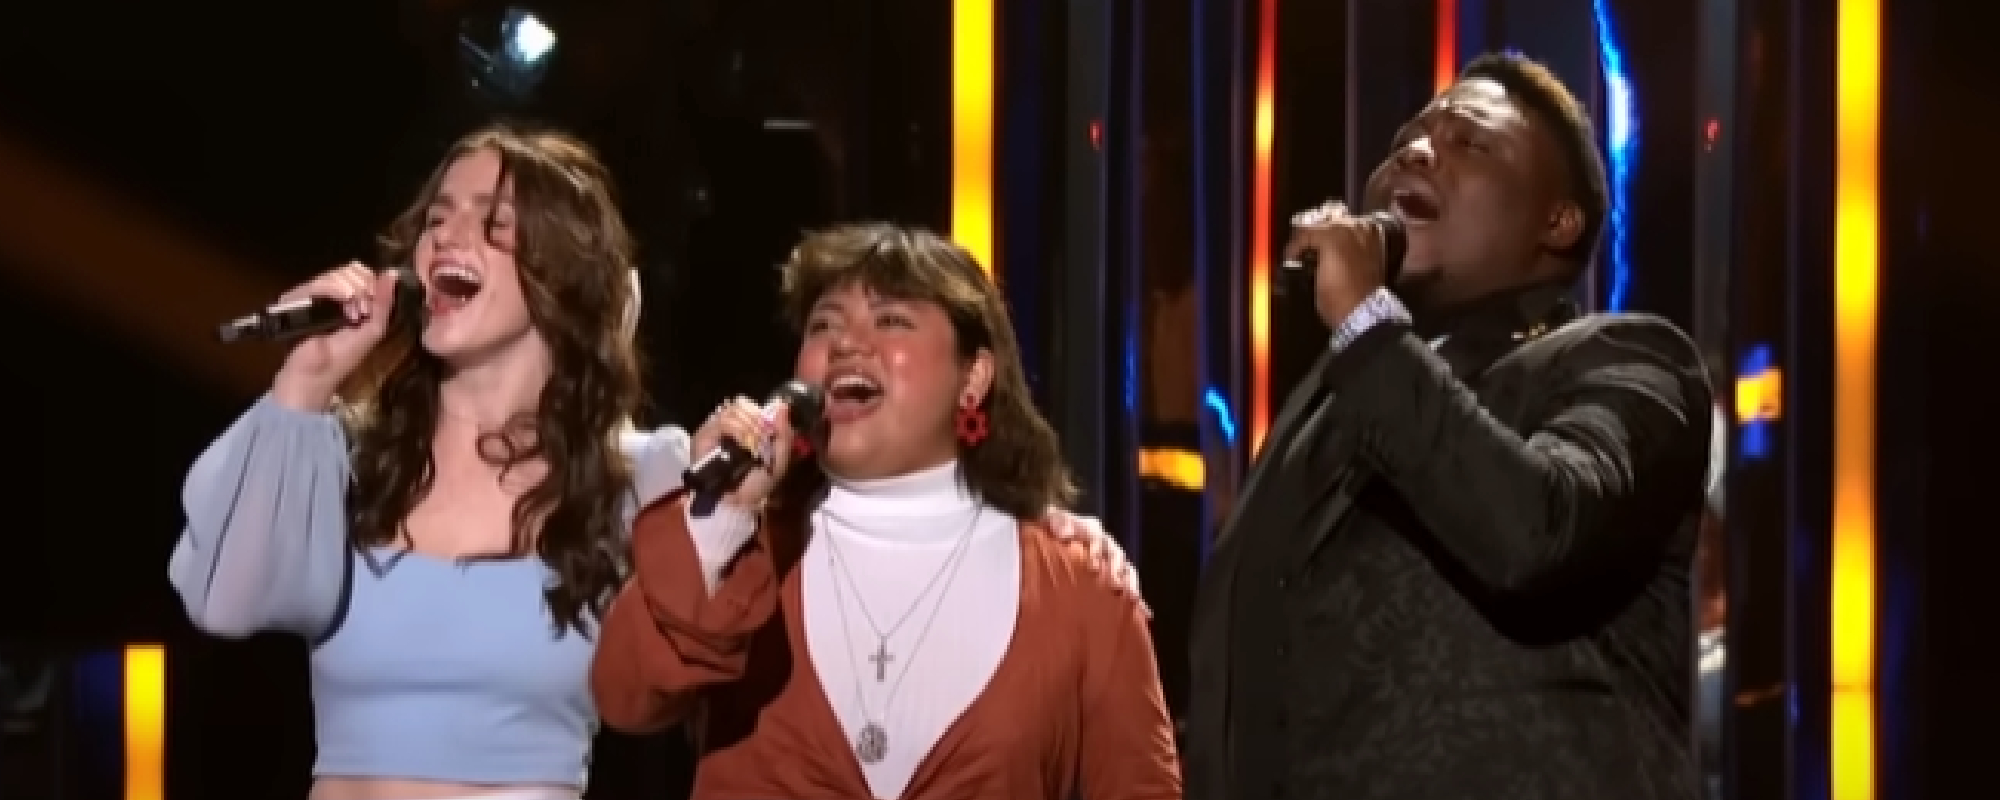 ‘American Idol’ Platinum Ticket Winners Give a Golden Performance of “California Dreamin'”